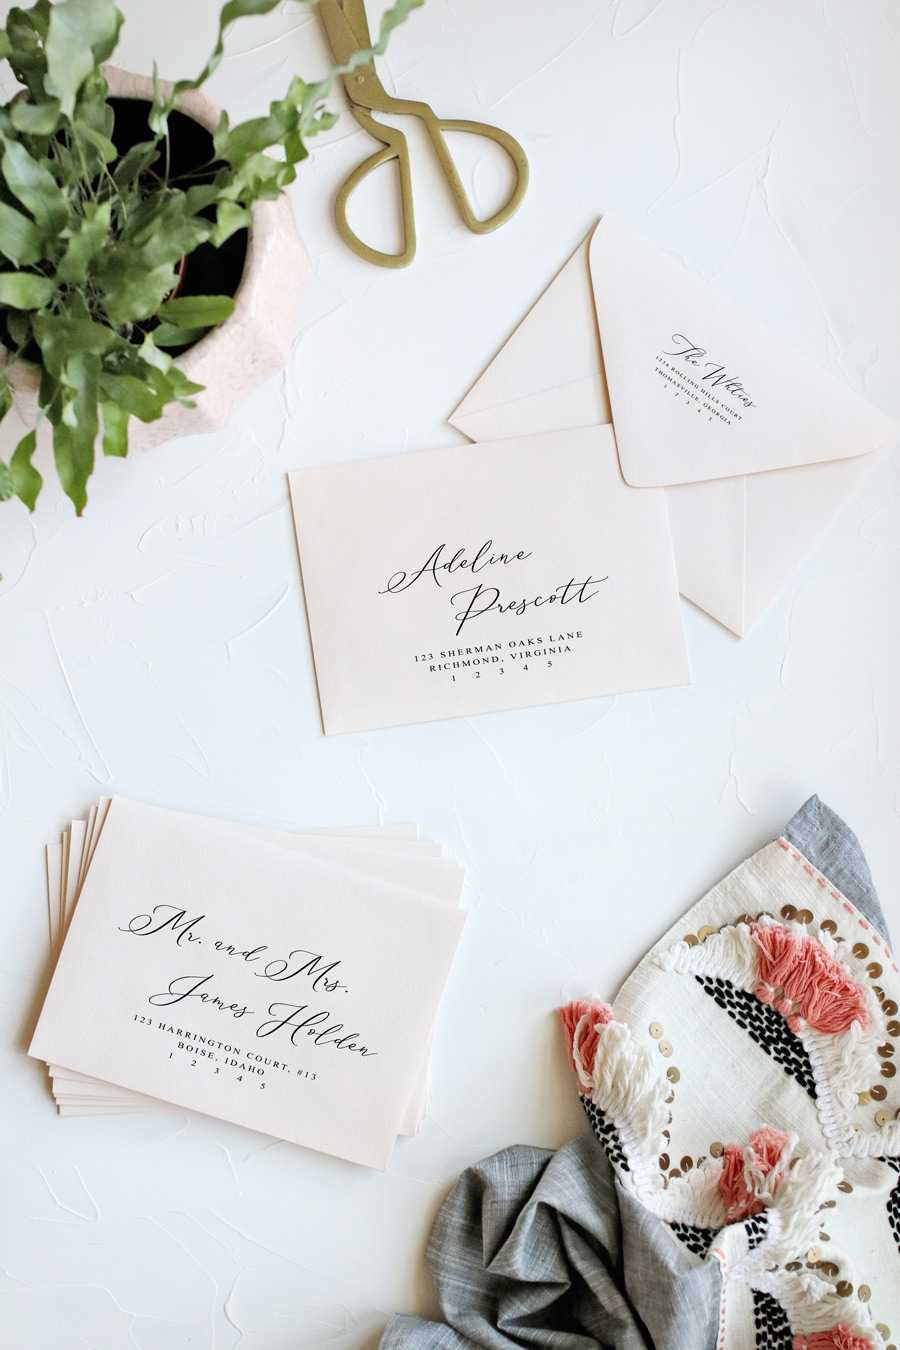 How To Print Envelopes The Easy Way | Pipkin Paper Company With Regard To Paper Source Templates Place Cards